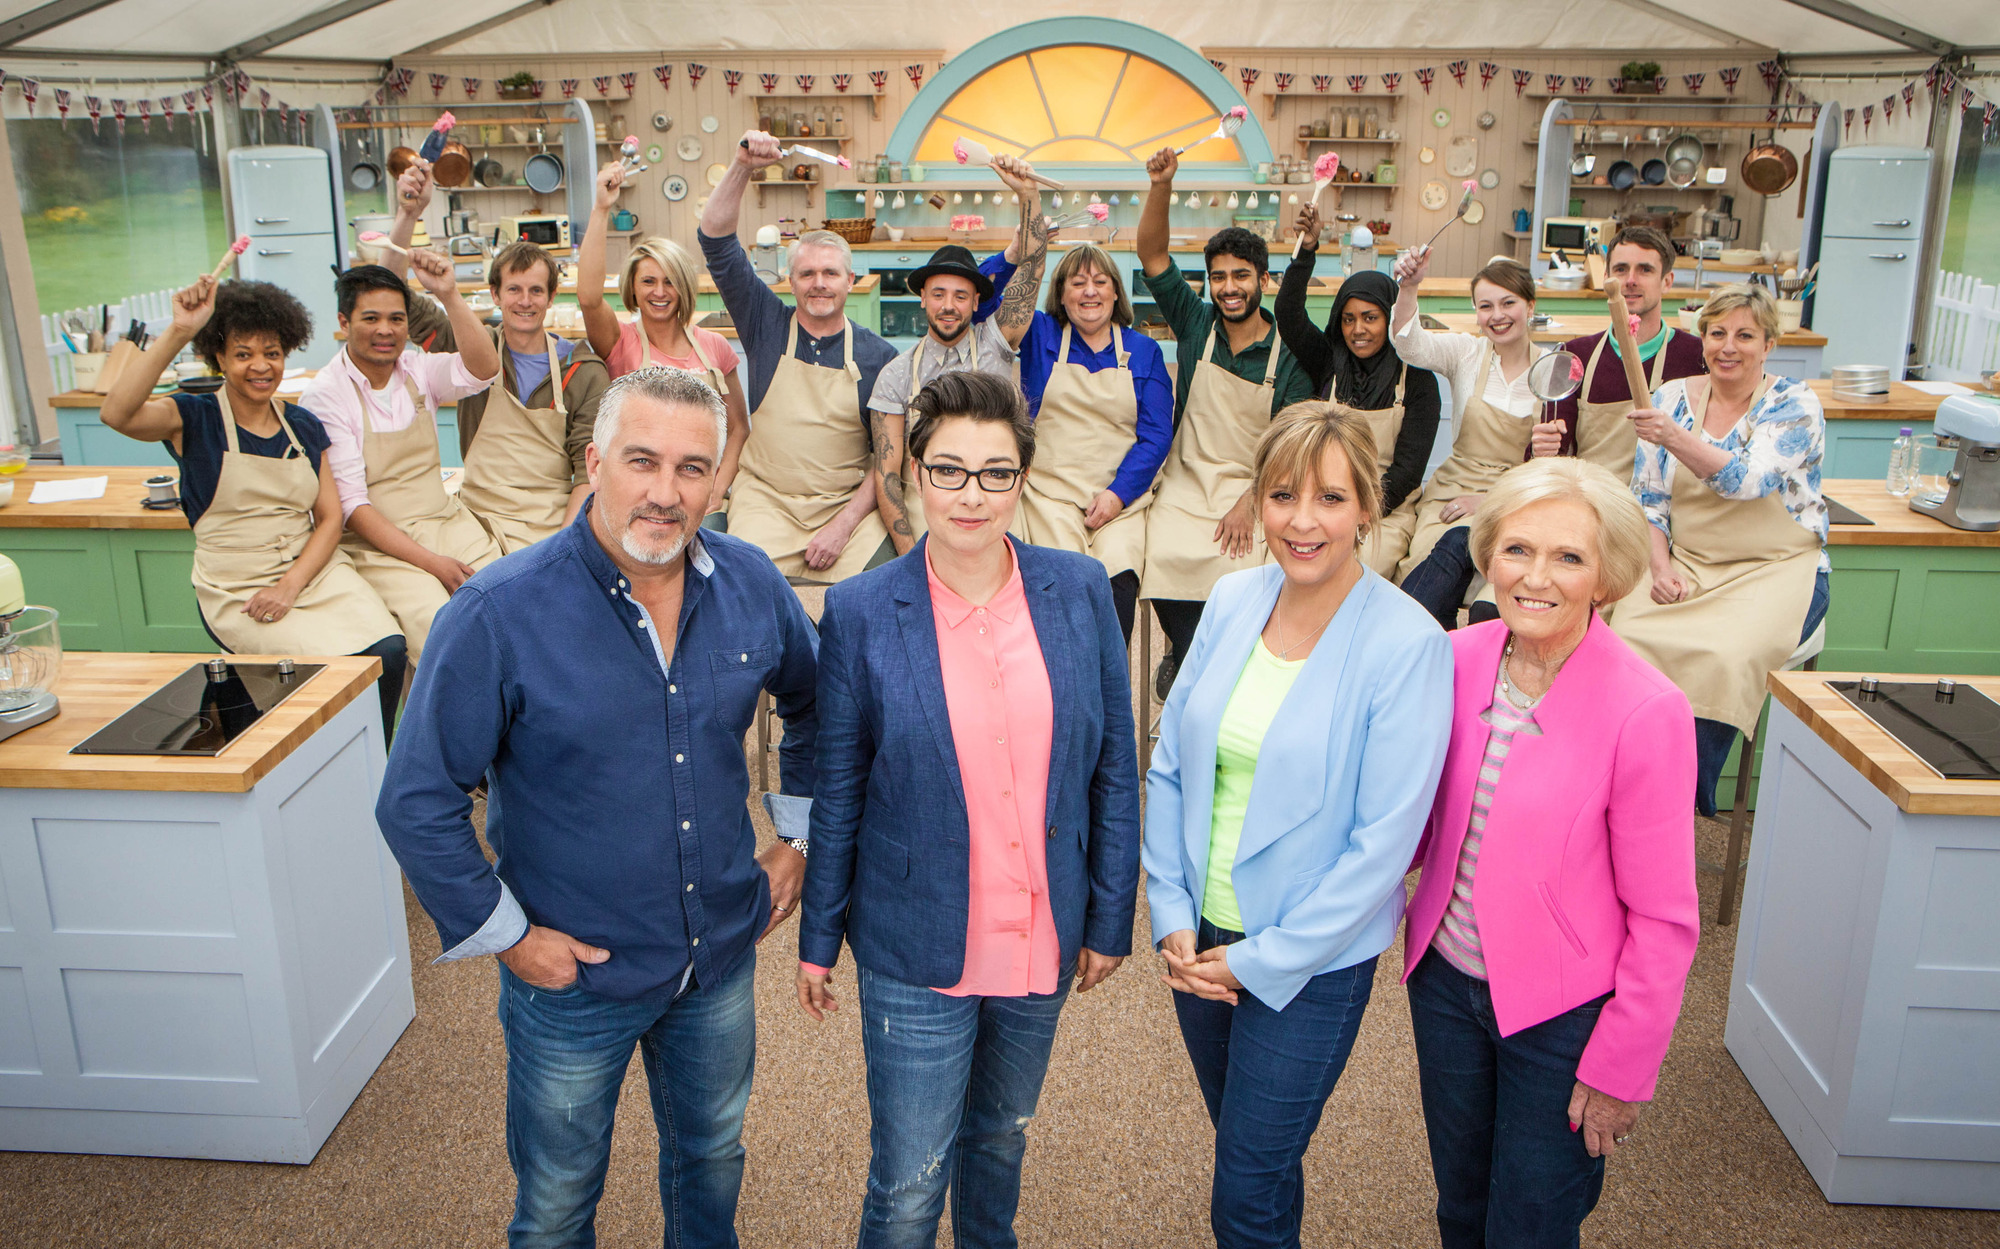 tv shows to binge watch - The Great British Bake Off